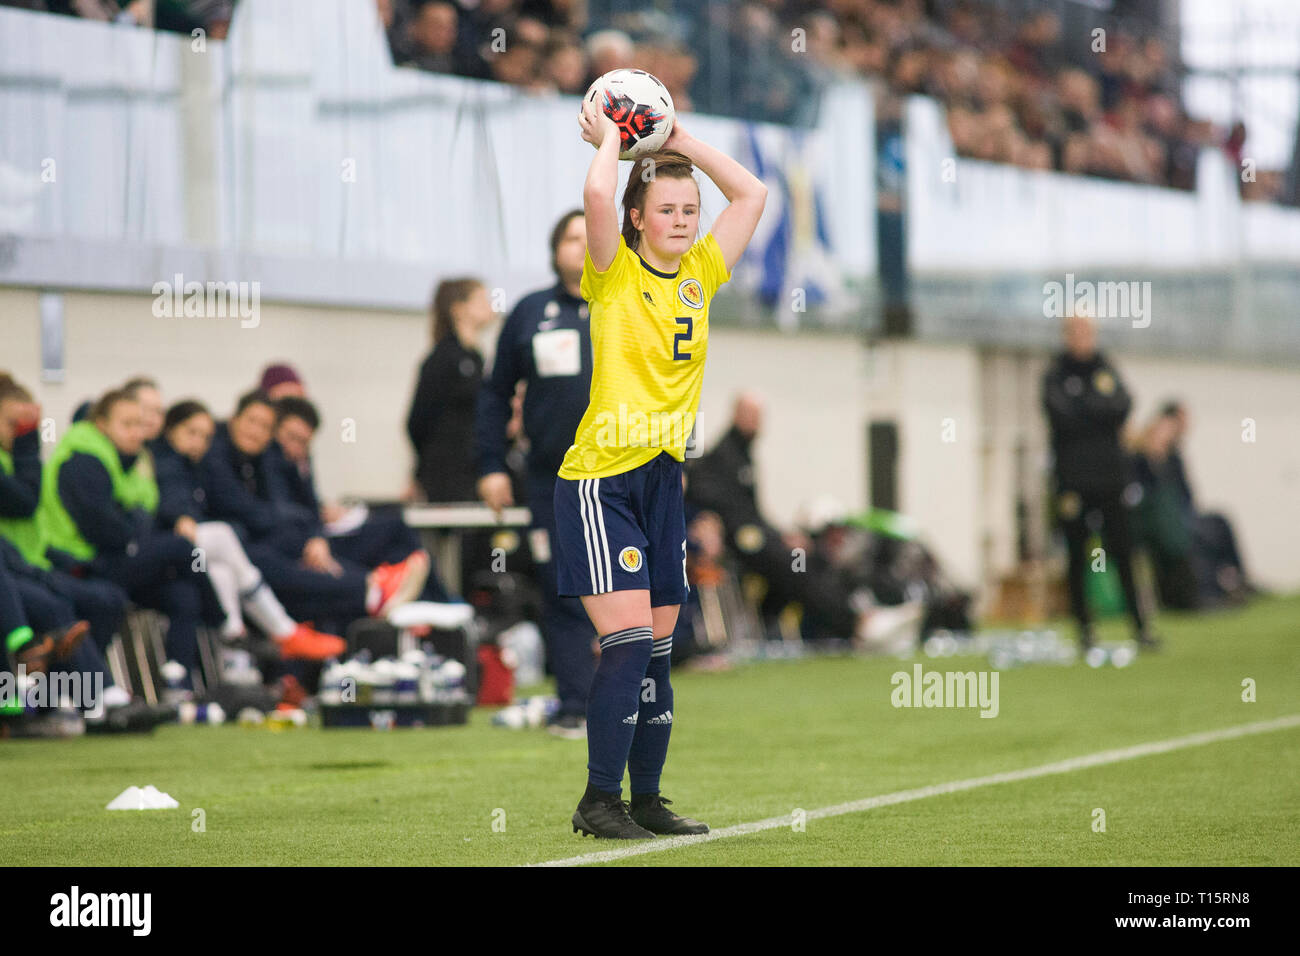 Edinburgh, Scotland - March 23: Chloe Warrington of Scotland during the UEFA Elite Round match between Scotland U17 Girl's and Norway U17 Girl's at Oriam Scotland, on March 23, 2019 in Edinburgh, Scotland. (Photo by Scottish Borders Media/Alamy Live News)  Editorial use only, license required for commercial use. No use in betting. Stock Photo